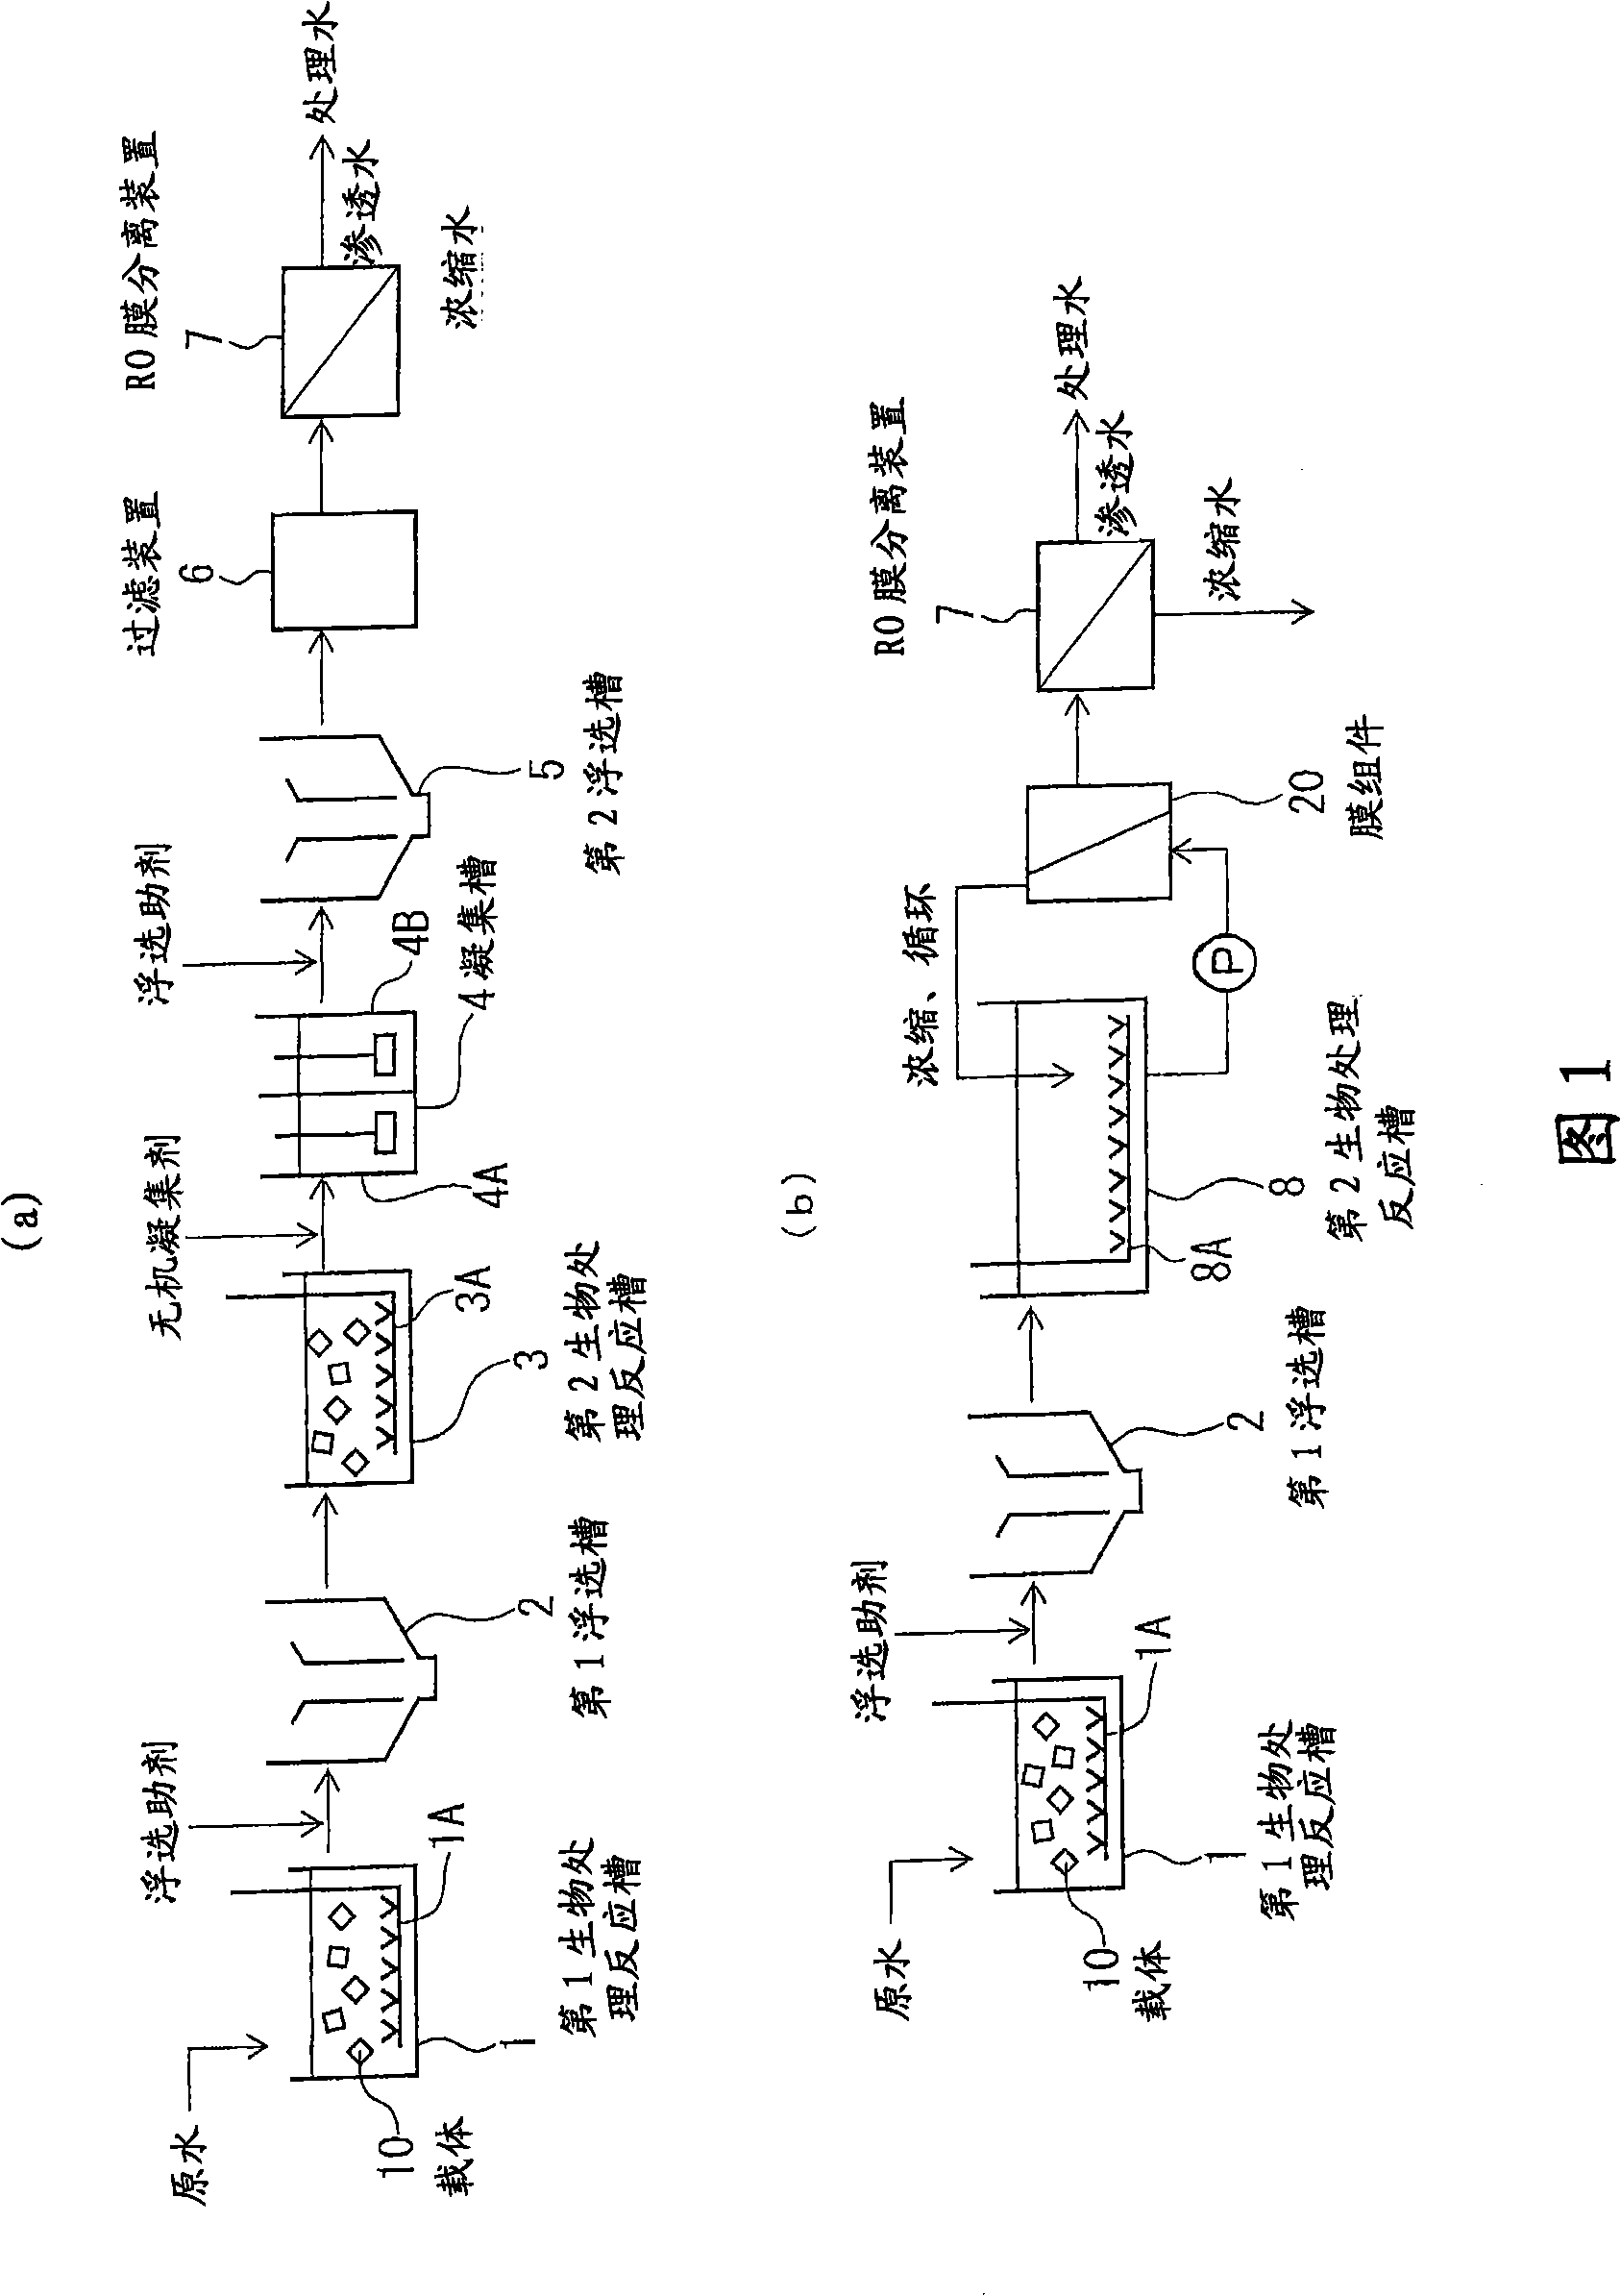 Treatment apparatus for organic wastewater